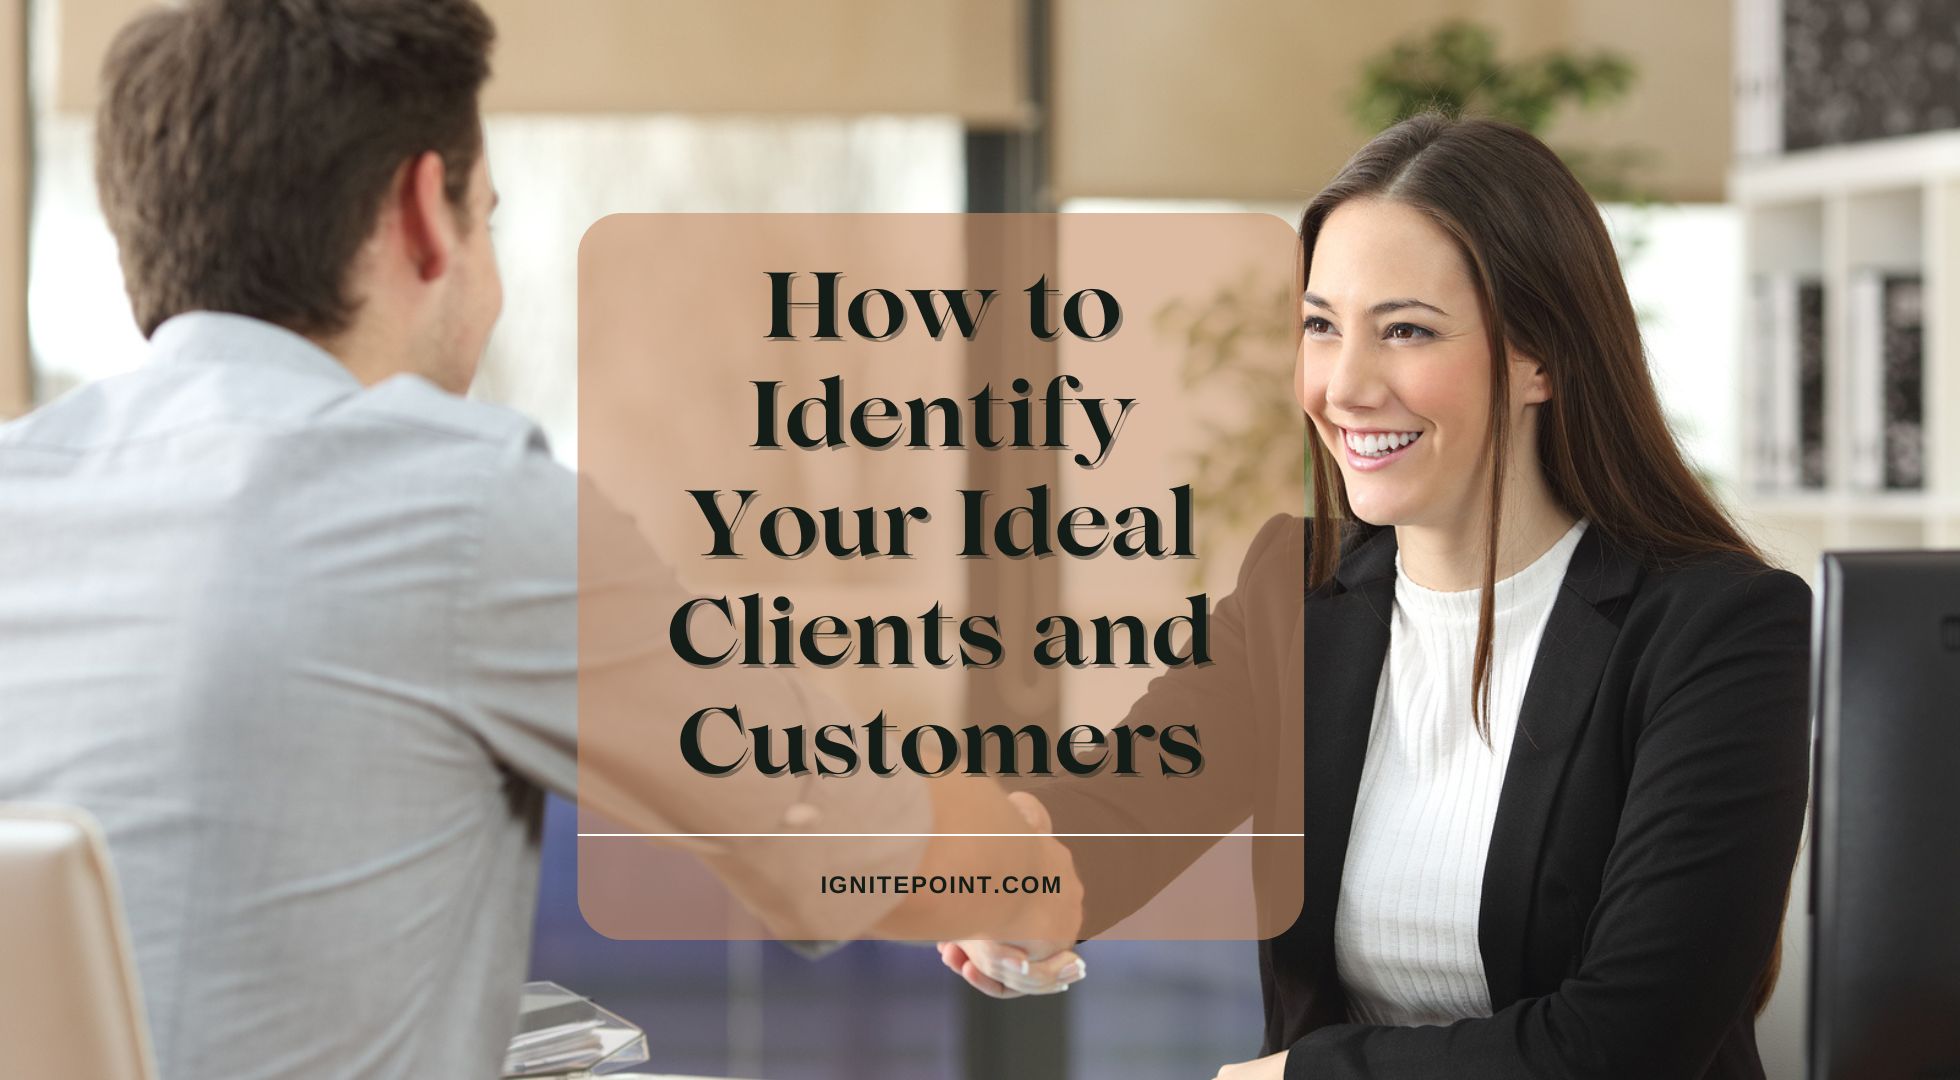 How to Identify and Connect with Your Ideal Clients and Customers